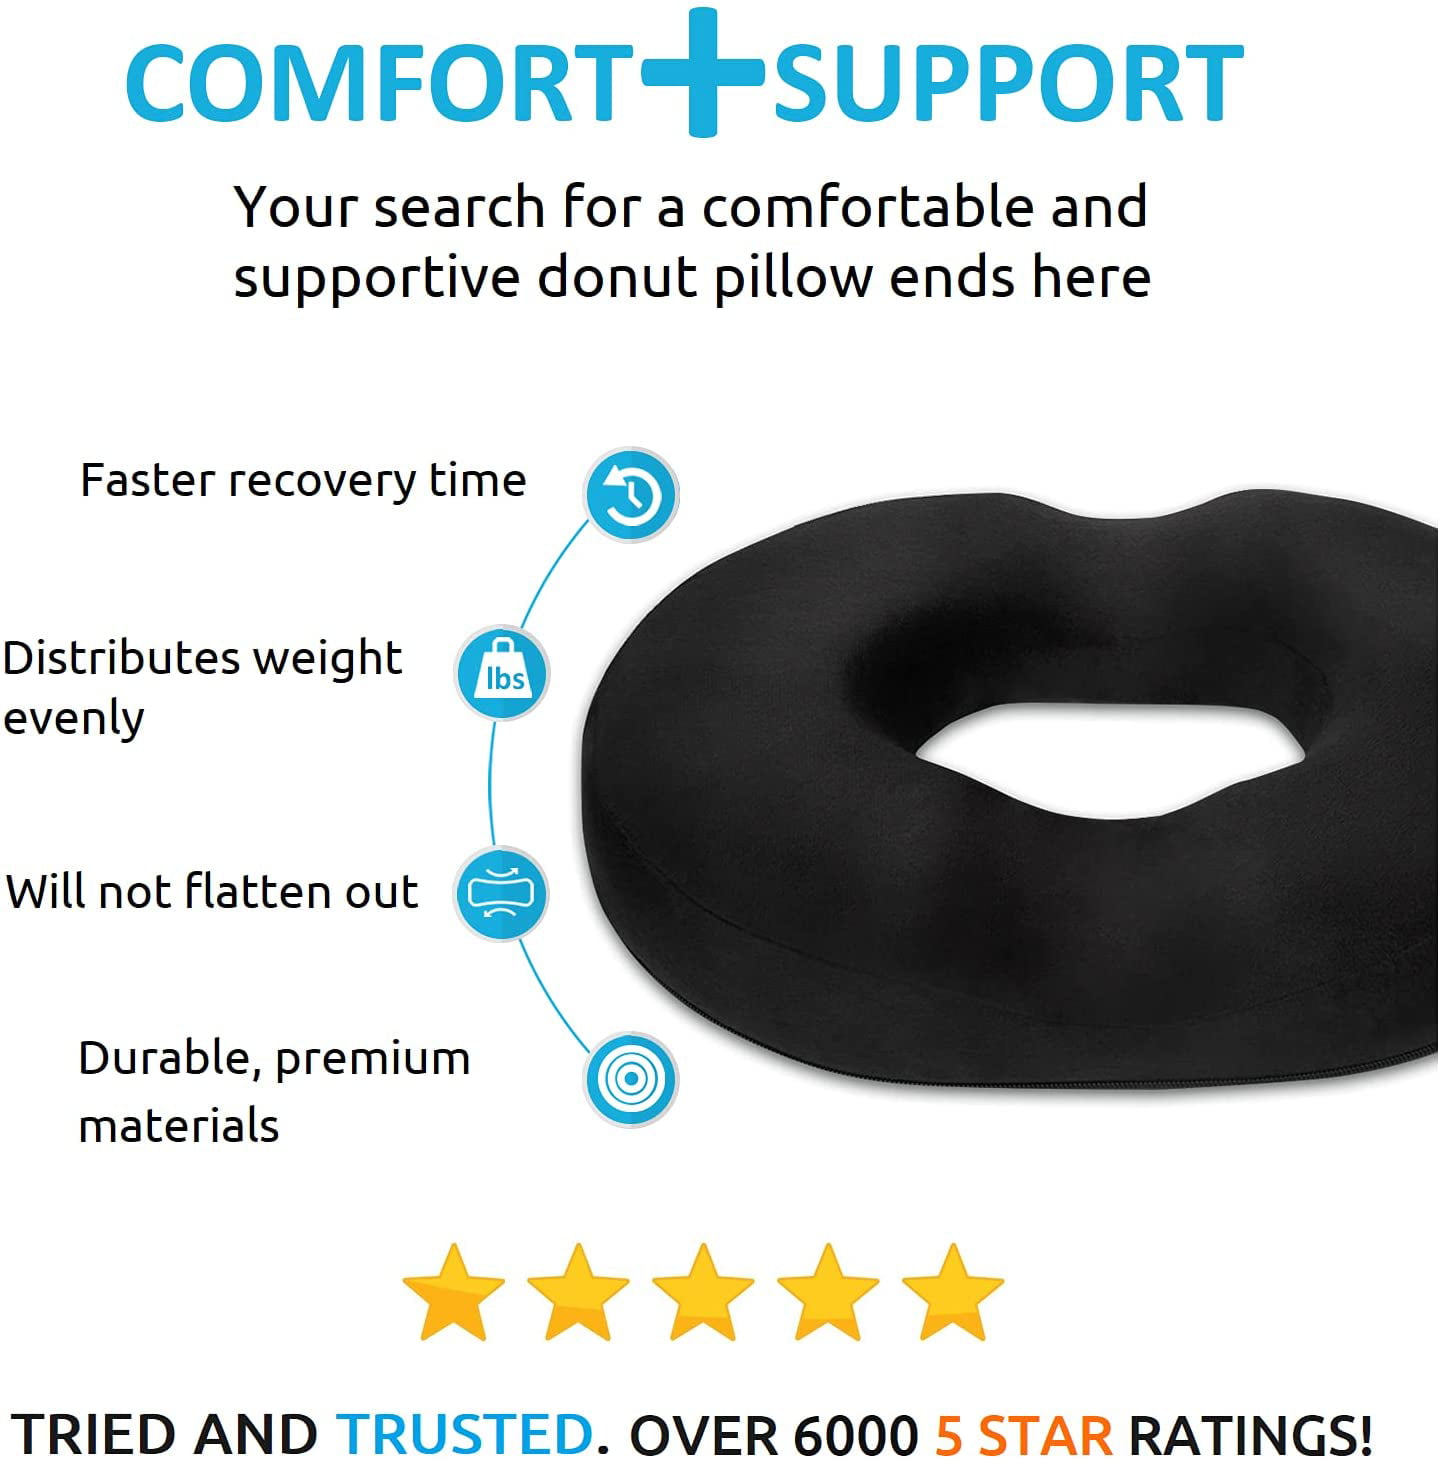 Sciatica Hemmoroid Treatment Pregnancy Bed Sores Male and Female Ergonomic Design Littlejimmy Donut Pillow-Donut Seat Cushion for Relief Tailbone Pain Coccyx Postpartum for Male Prostate 